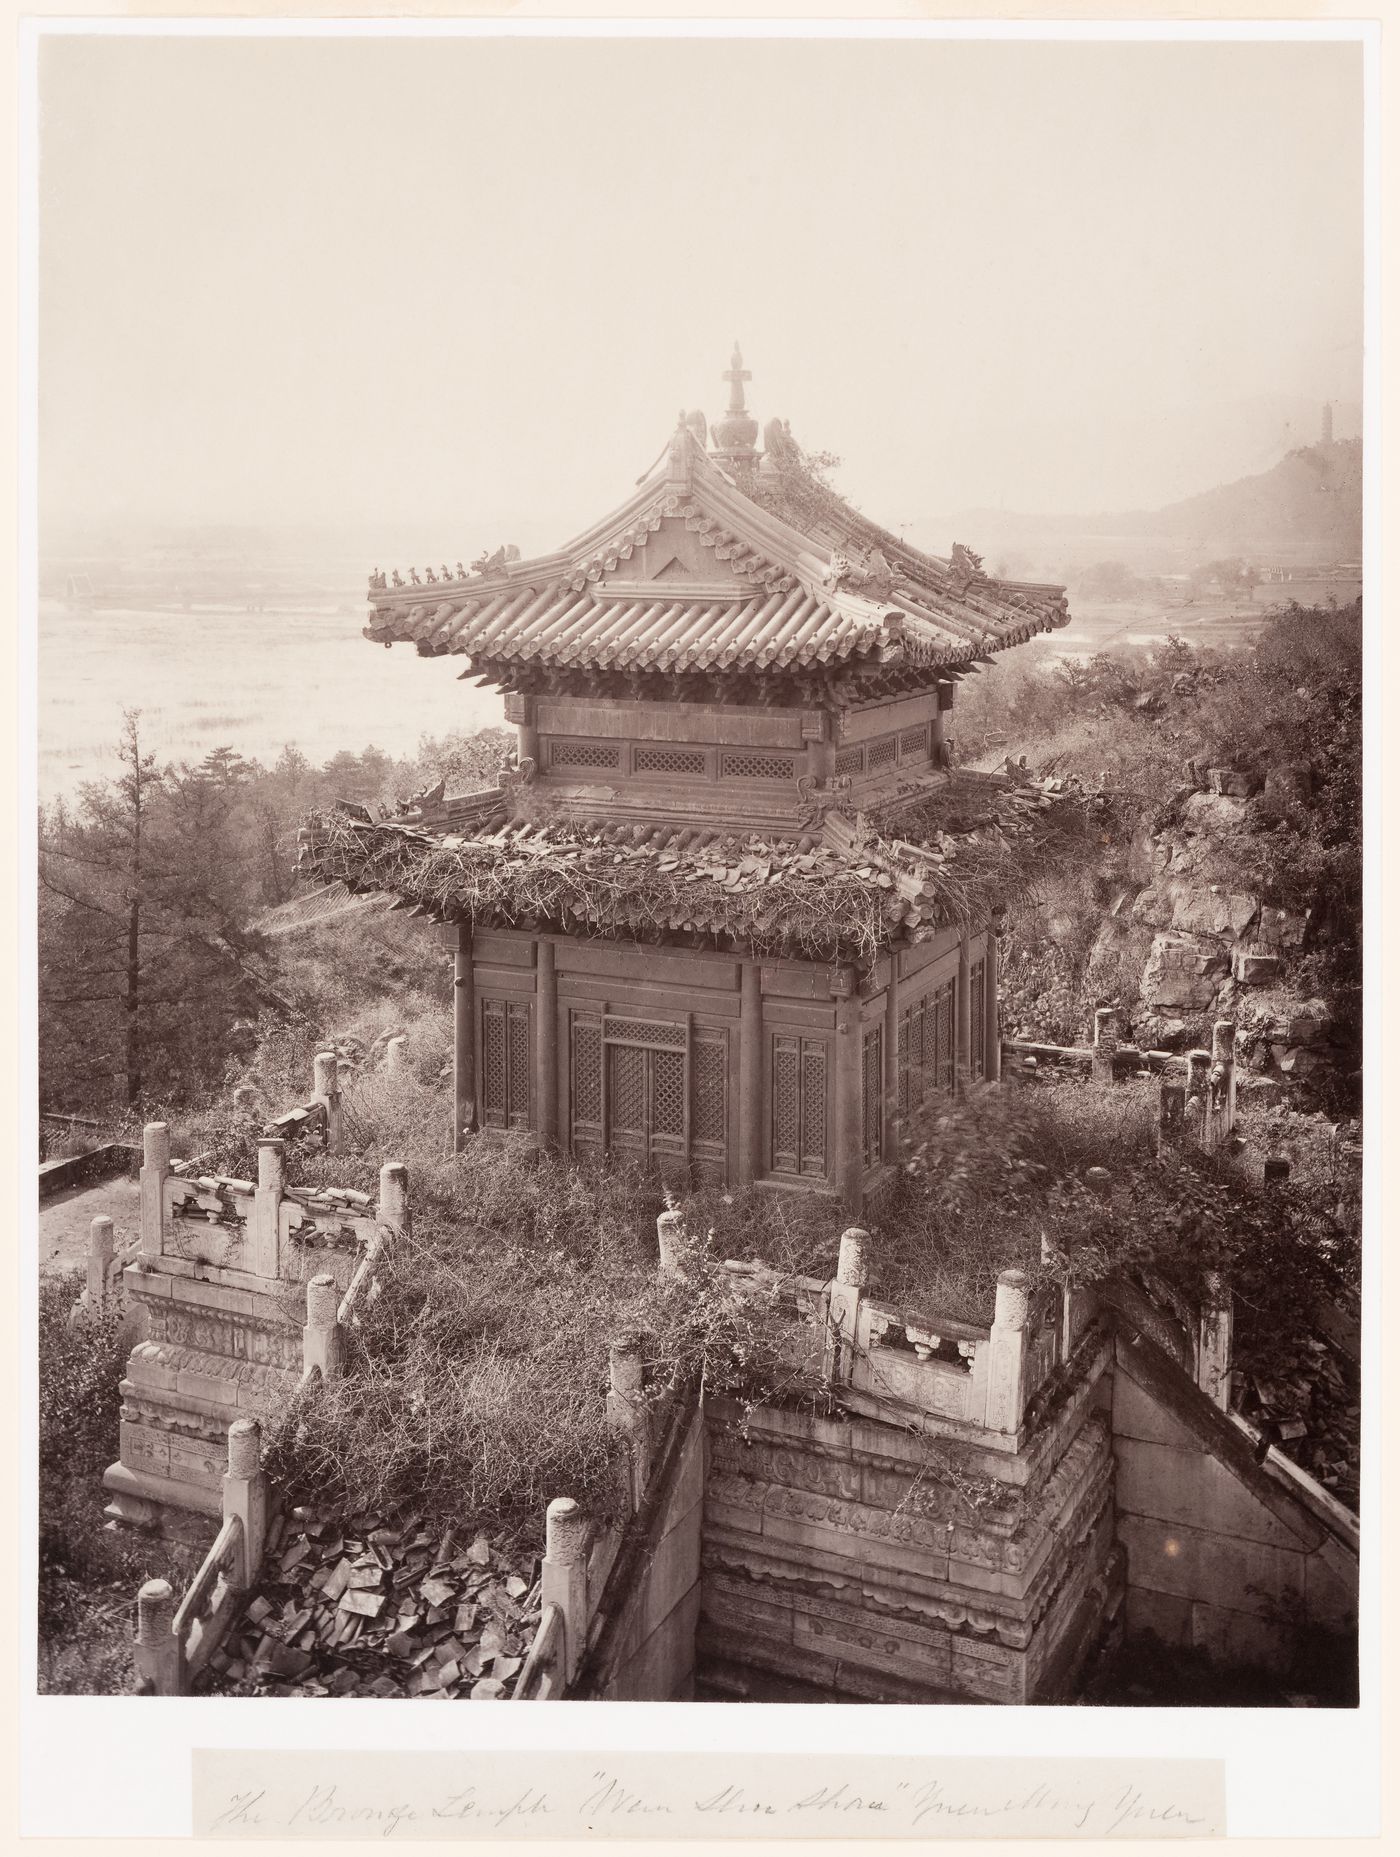 View of the ruins of the Pavilion of Precious Clouds [Baoyun Ge] (also known as the Bronze Pavilion), Garden of the Clear Ripples [Qing Yi Yuan] (now known as the Summer Palace or Yihe Yuan), Peking (now Beijing), China